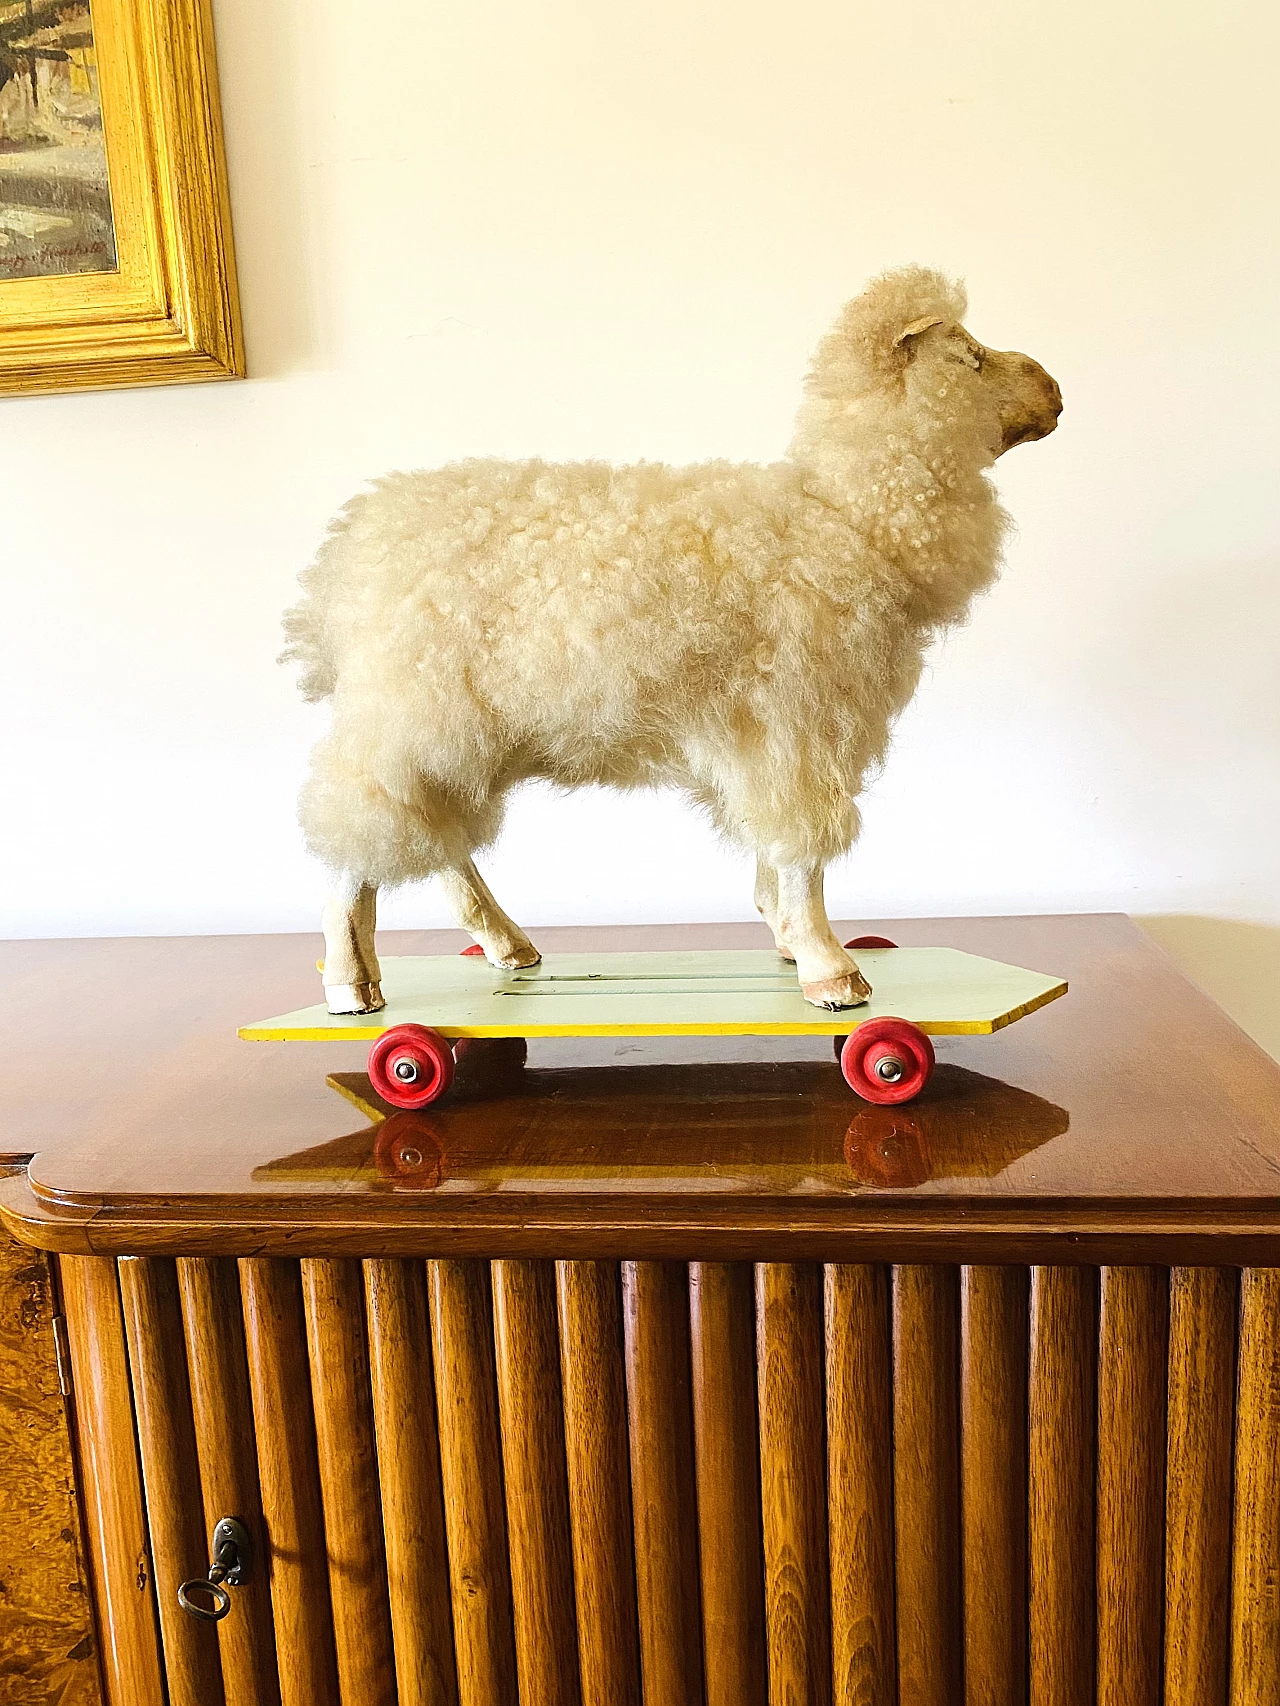 Wool and wood toy sheep with wheels 3